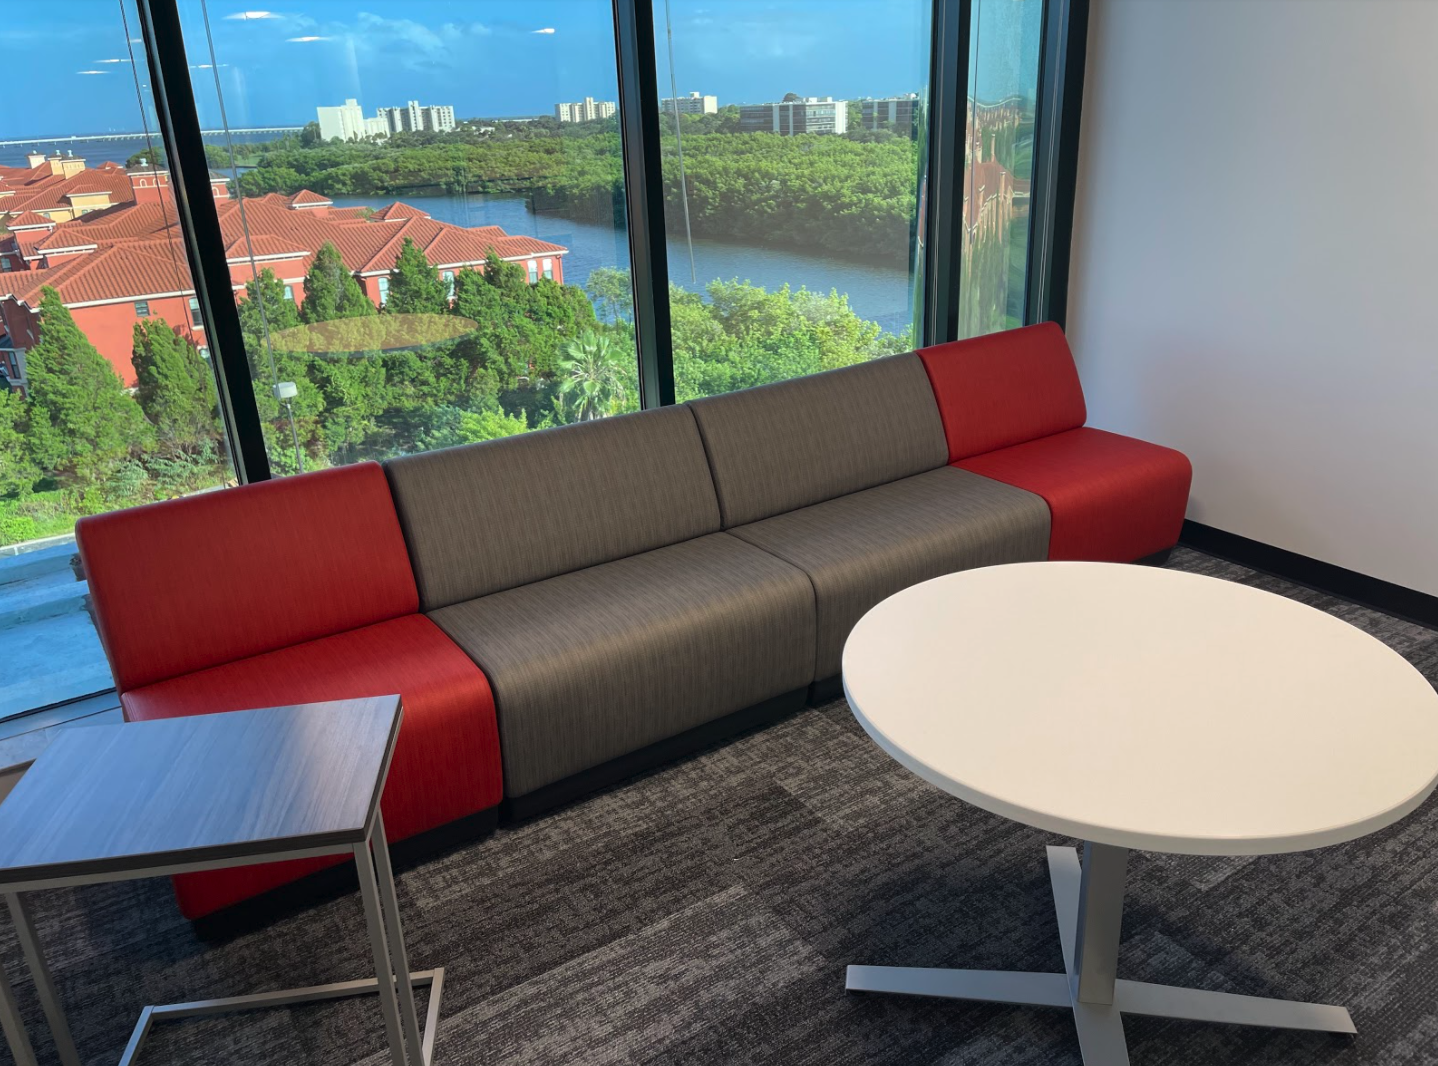 KUL waiting area seating solutions